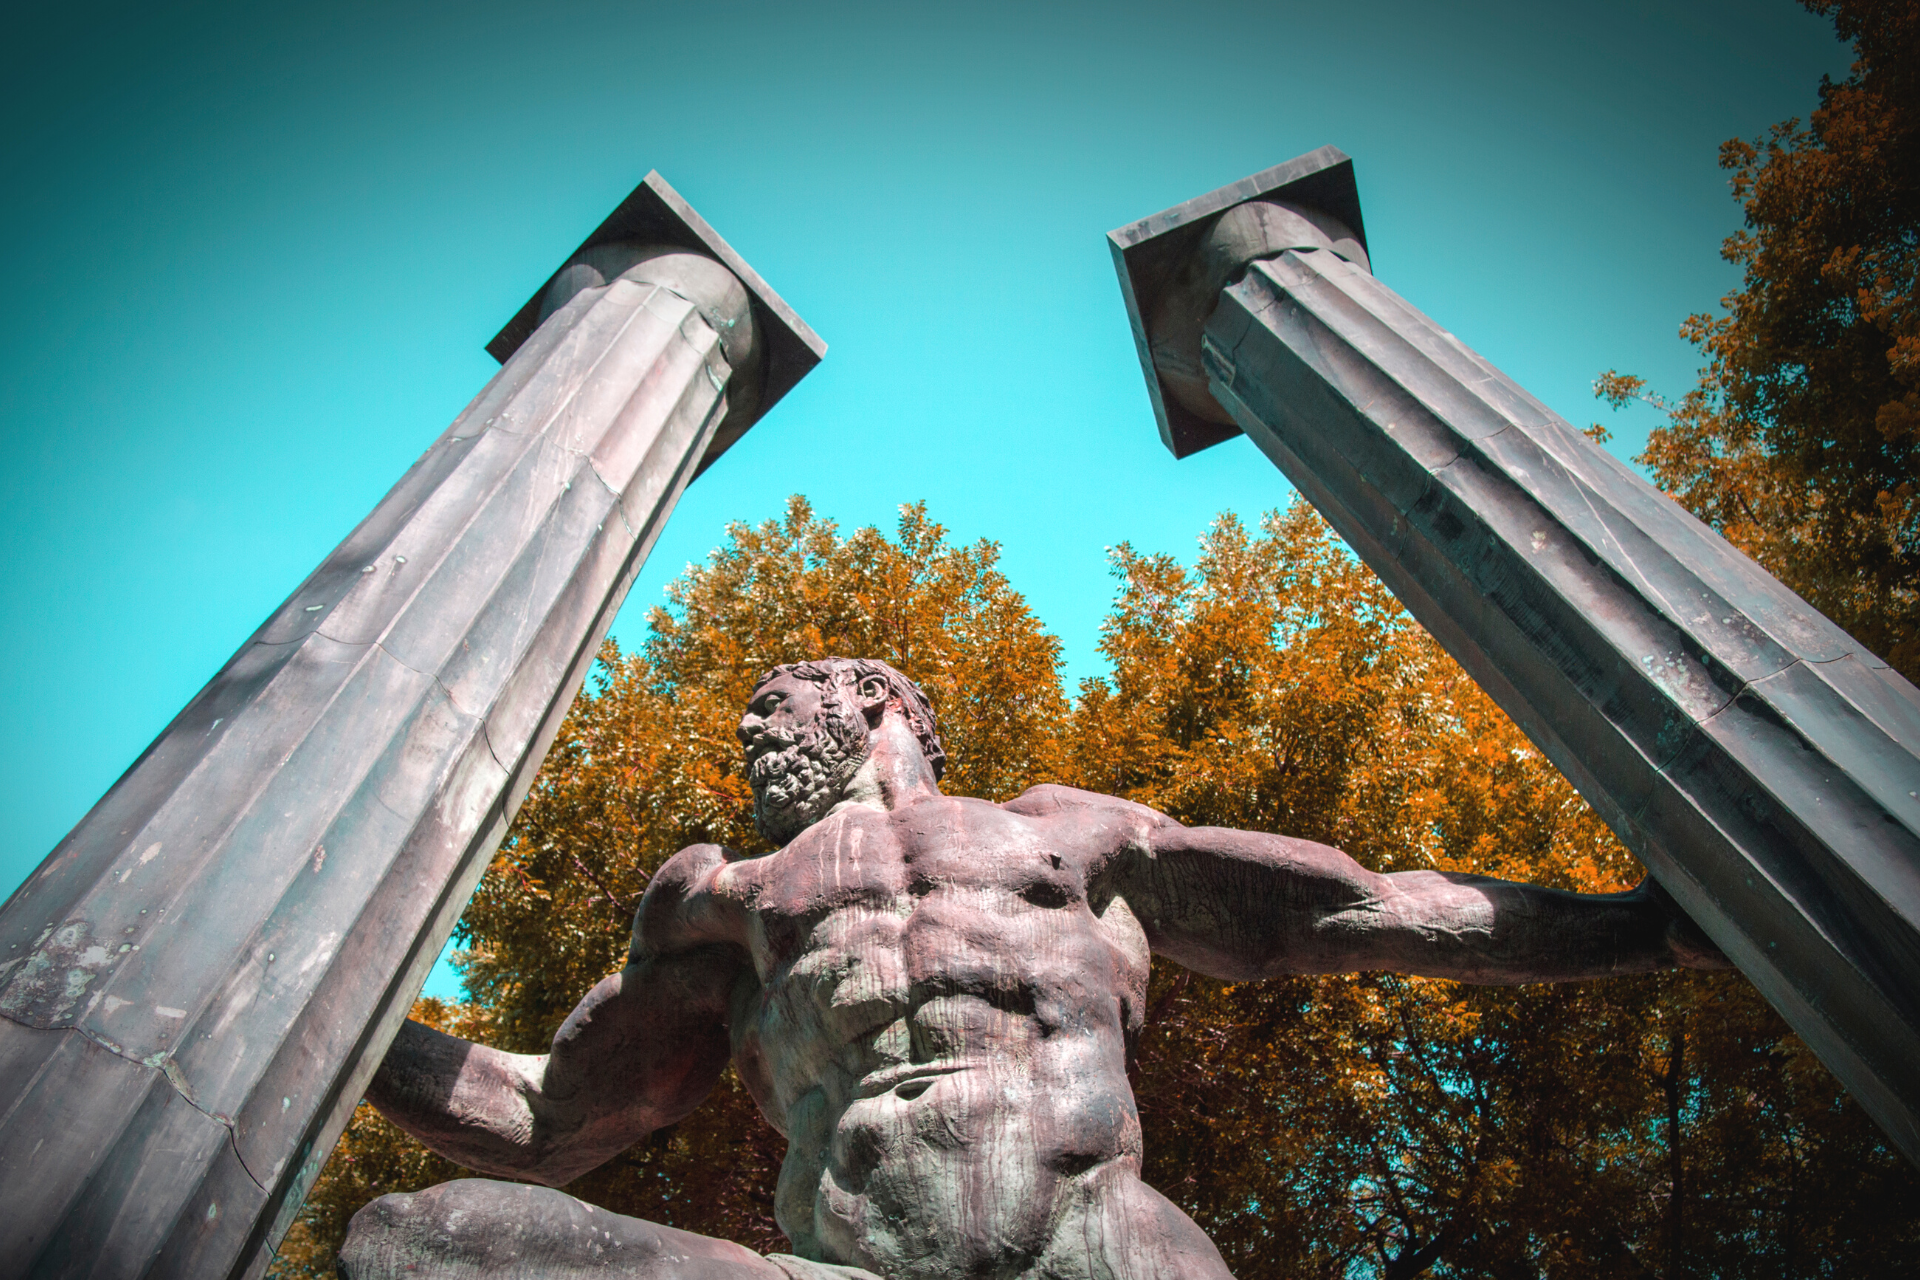 Atlas & Hercules: Shouldering the Weight of the World